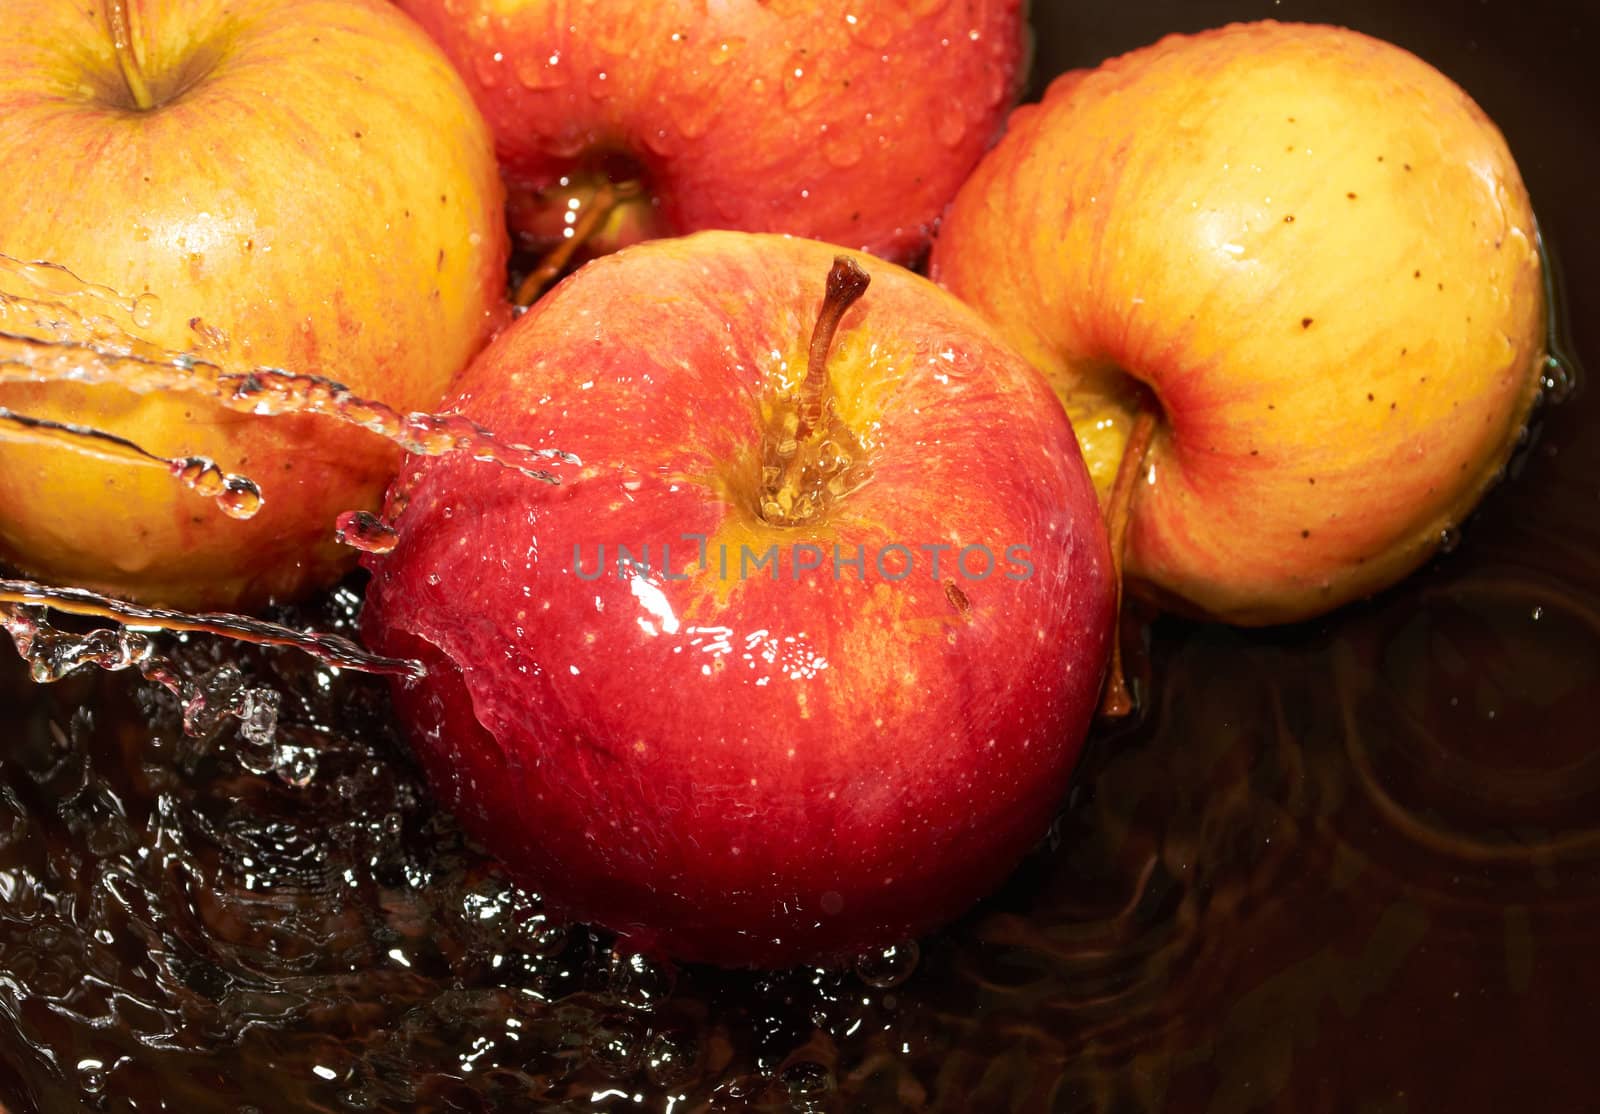 Ripe red apple is under the running water